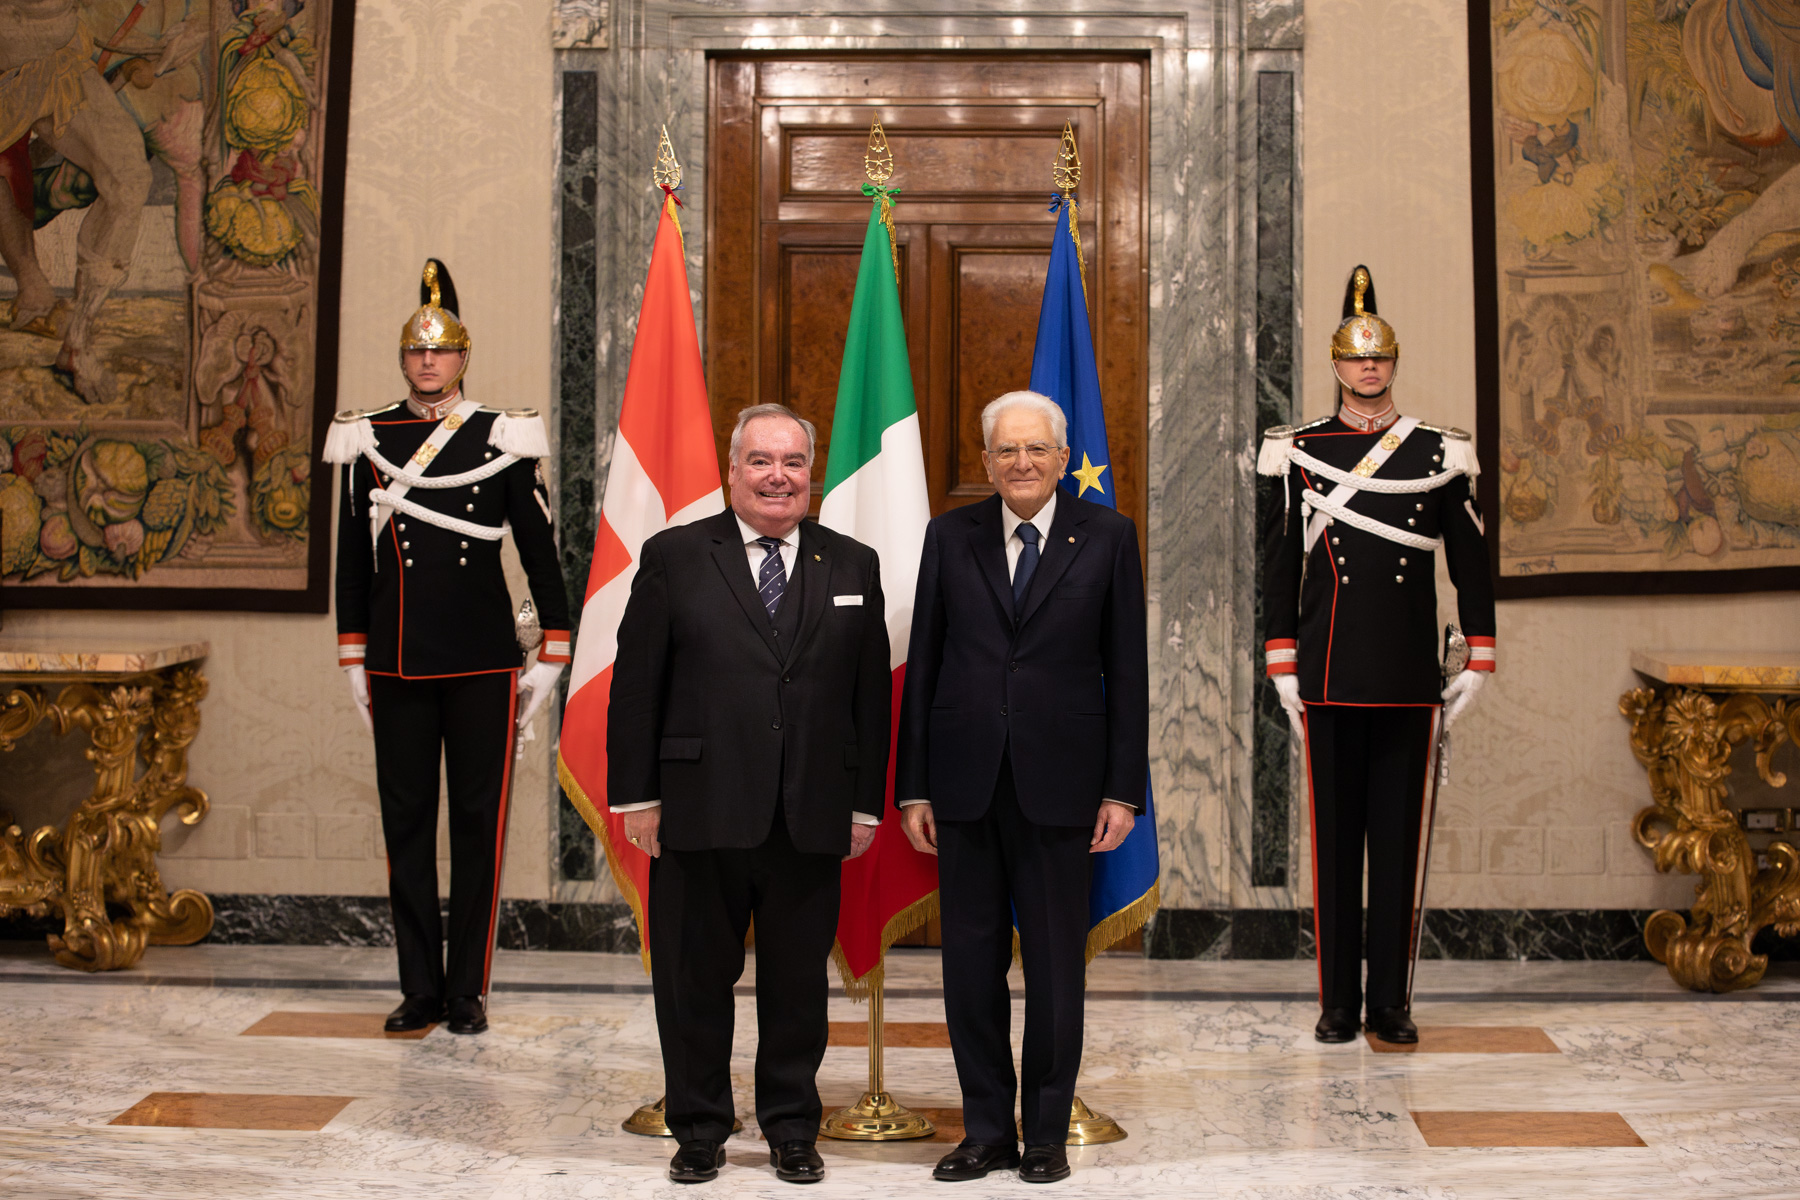 President Sergio Mattarella receives new Government of Sovereign Order of Malta on official visit